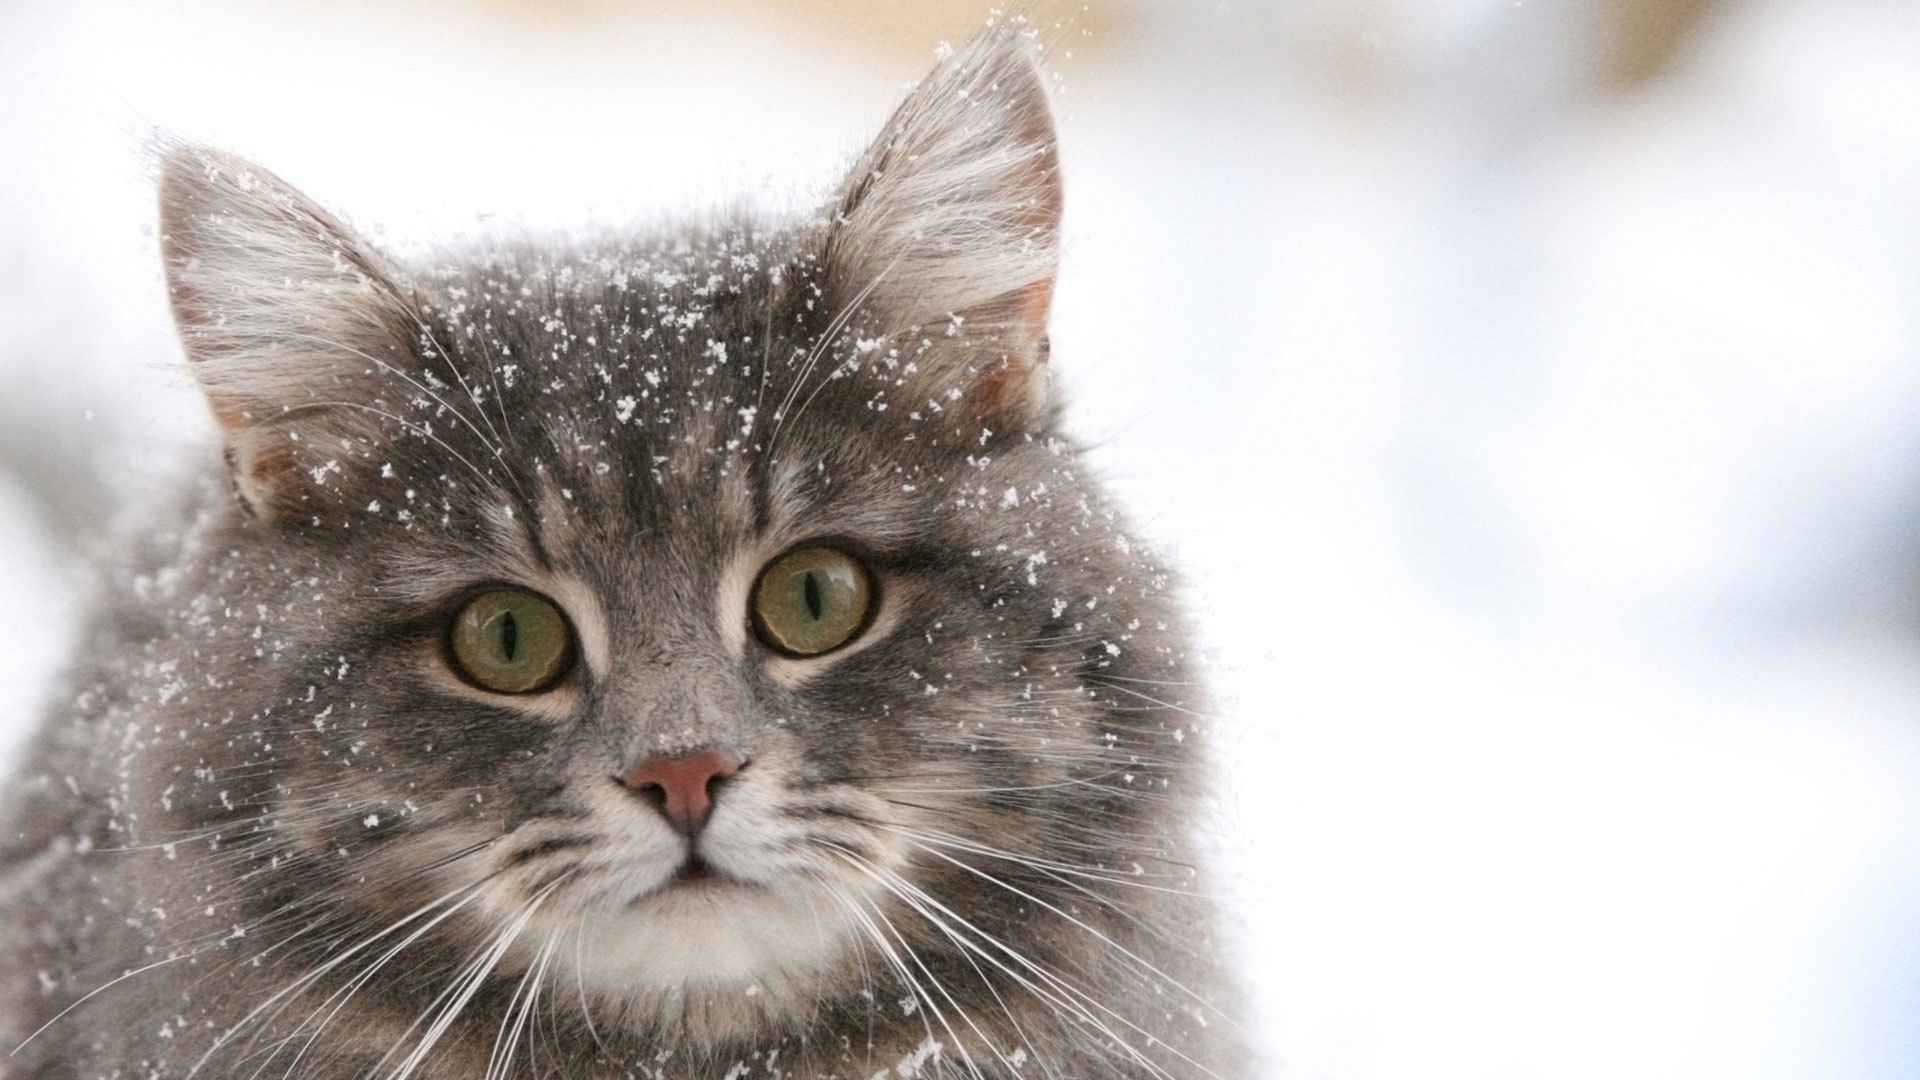 Siberian cat in the snow wallpapers and images   wallpapers pictures 1920x1080